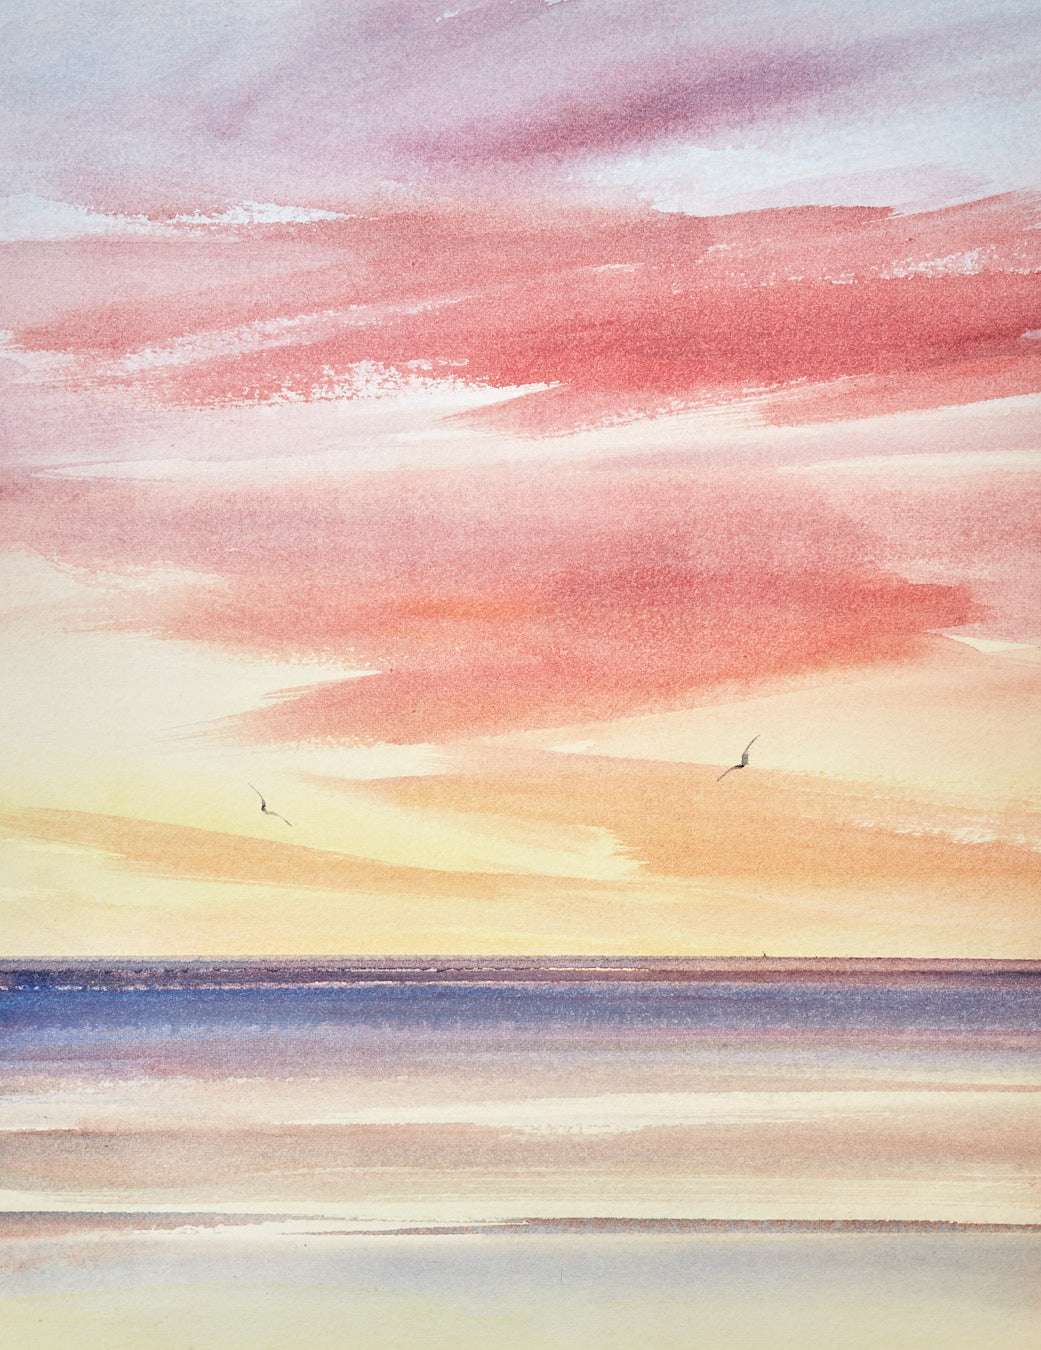 Large image of Shore after sunset original watercolour painting